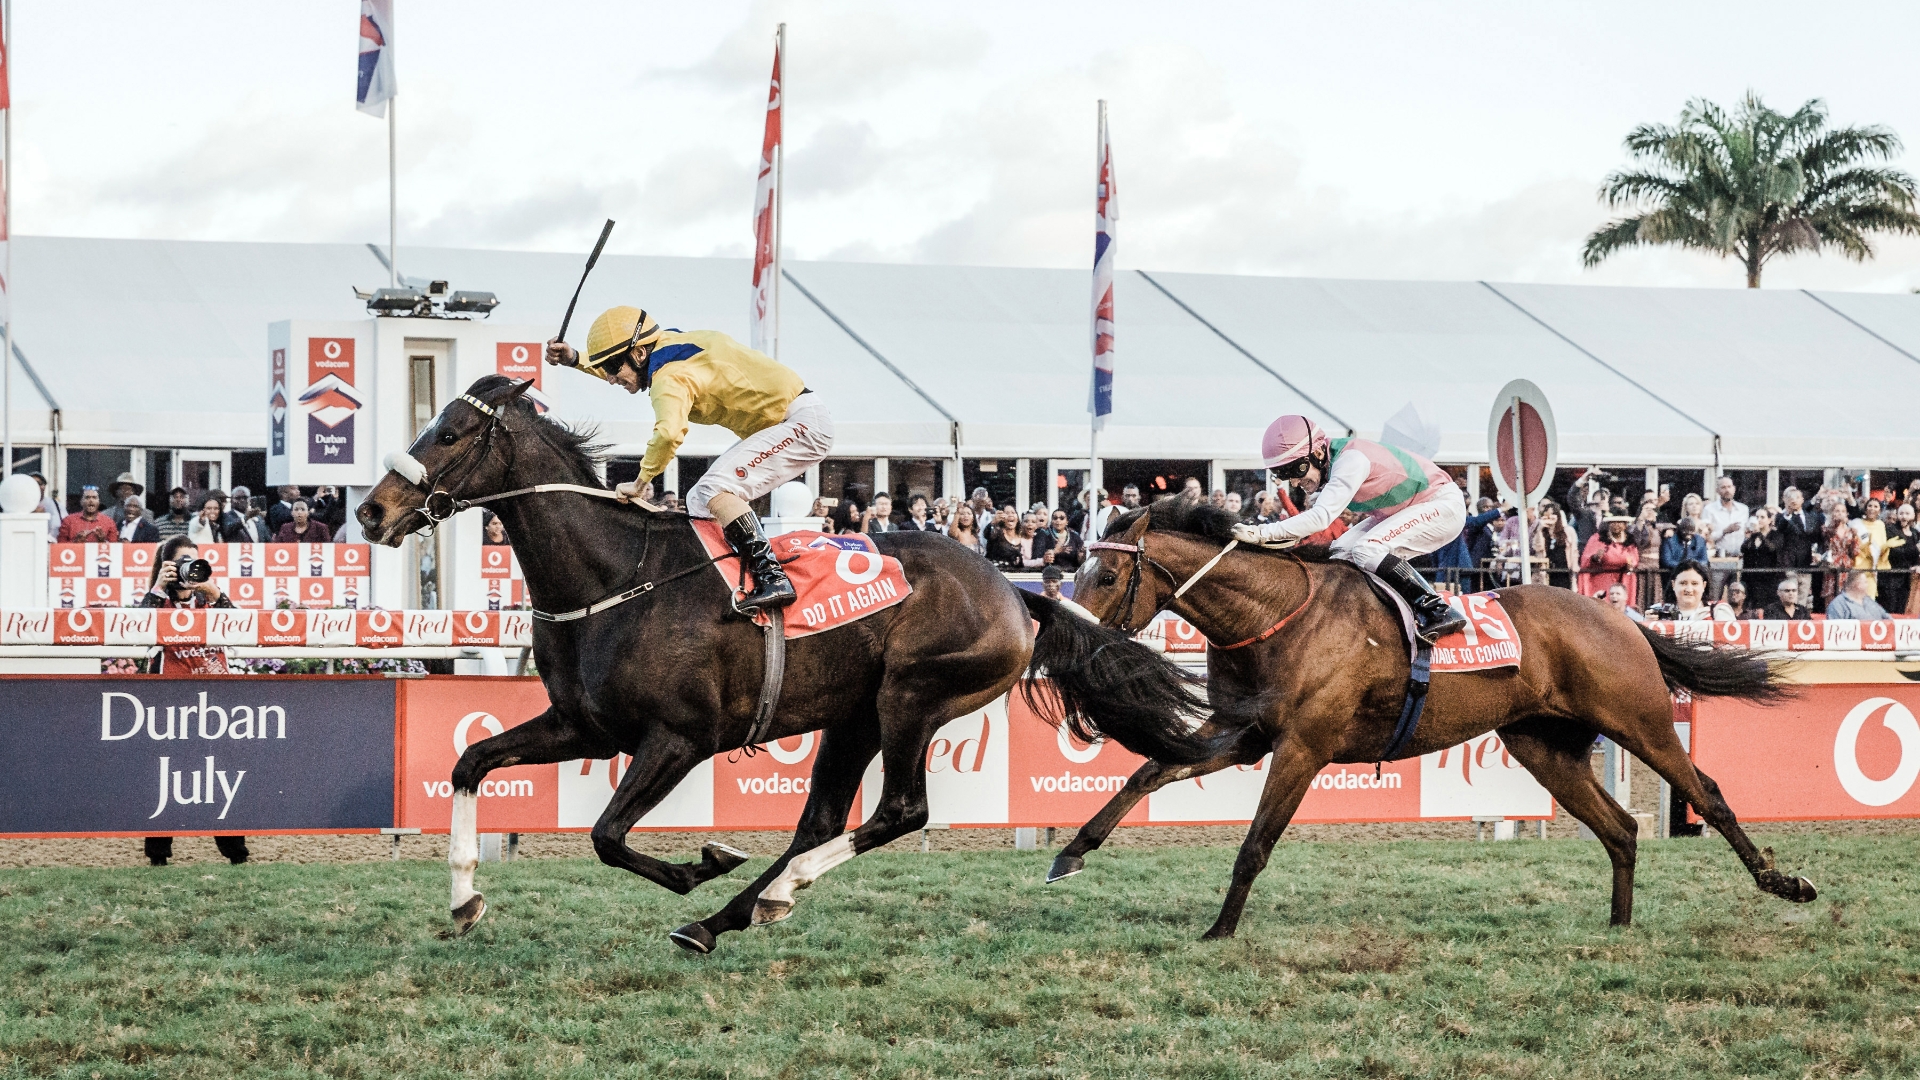 2024 Durban July News When is the 2024 Durban July?